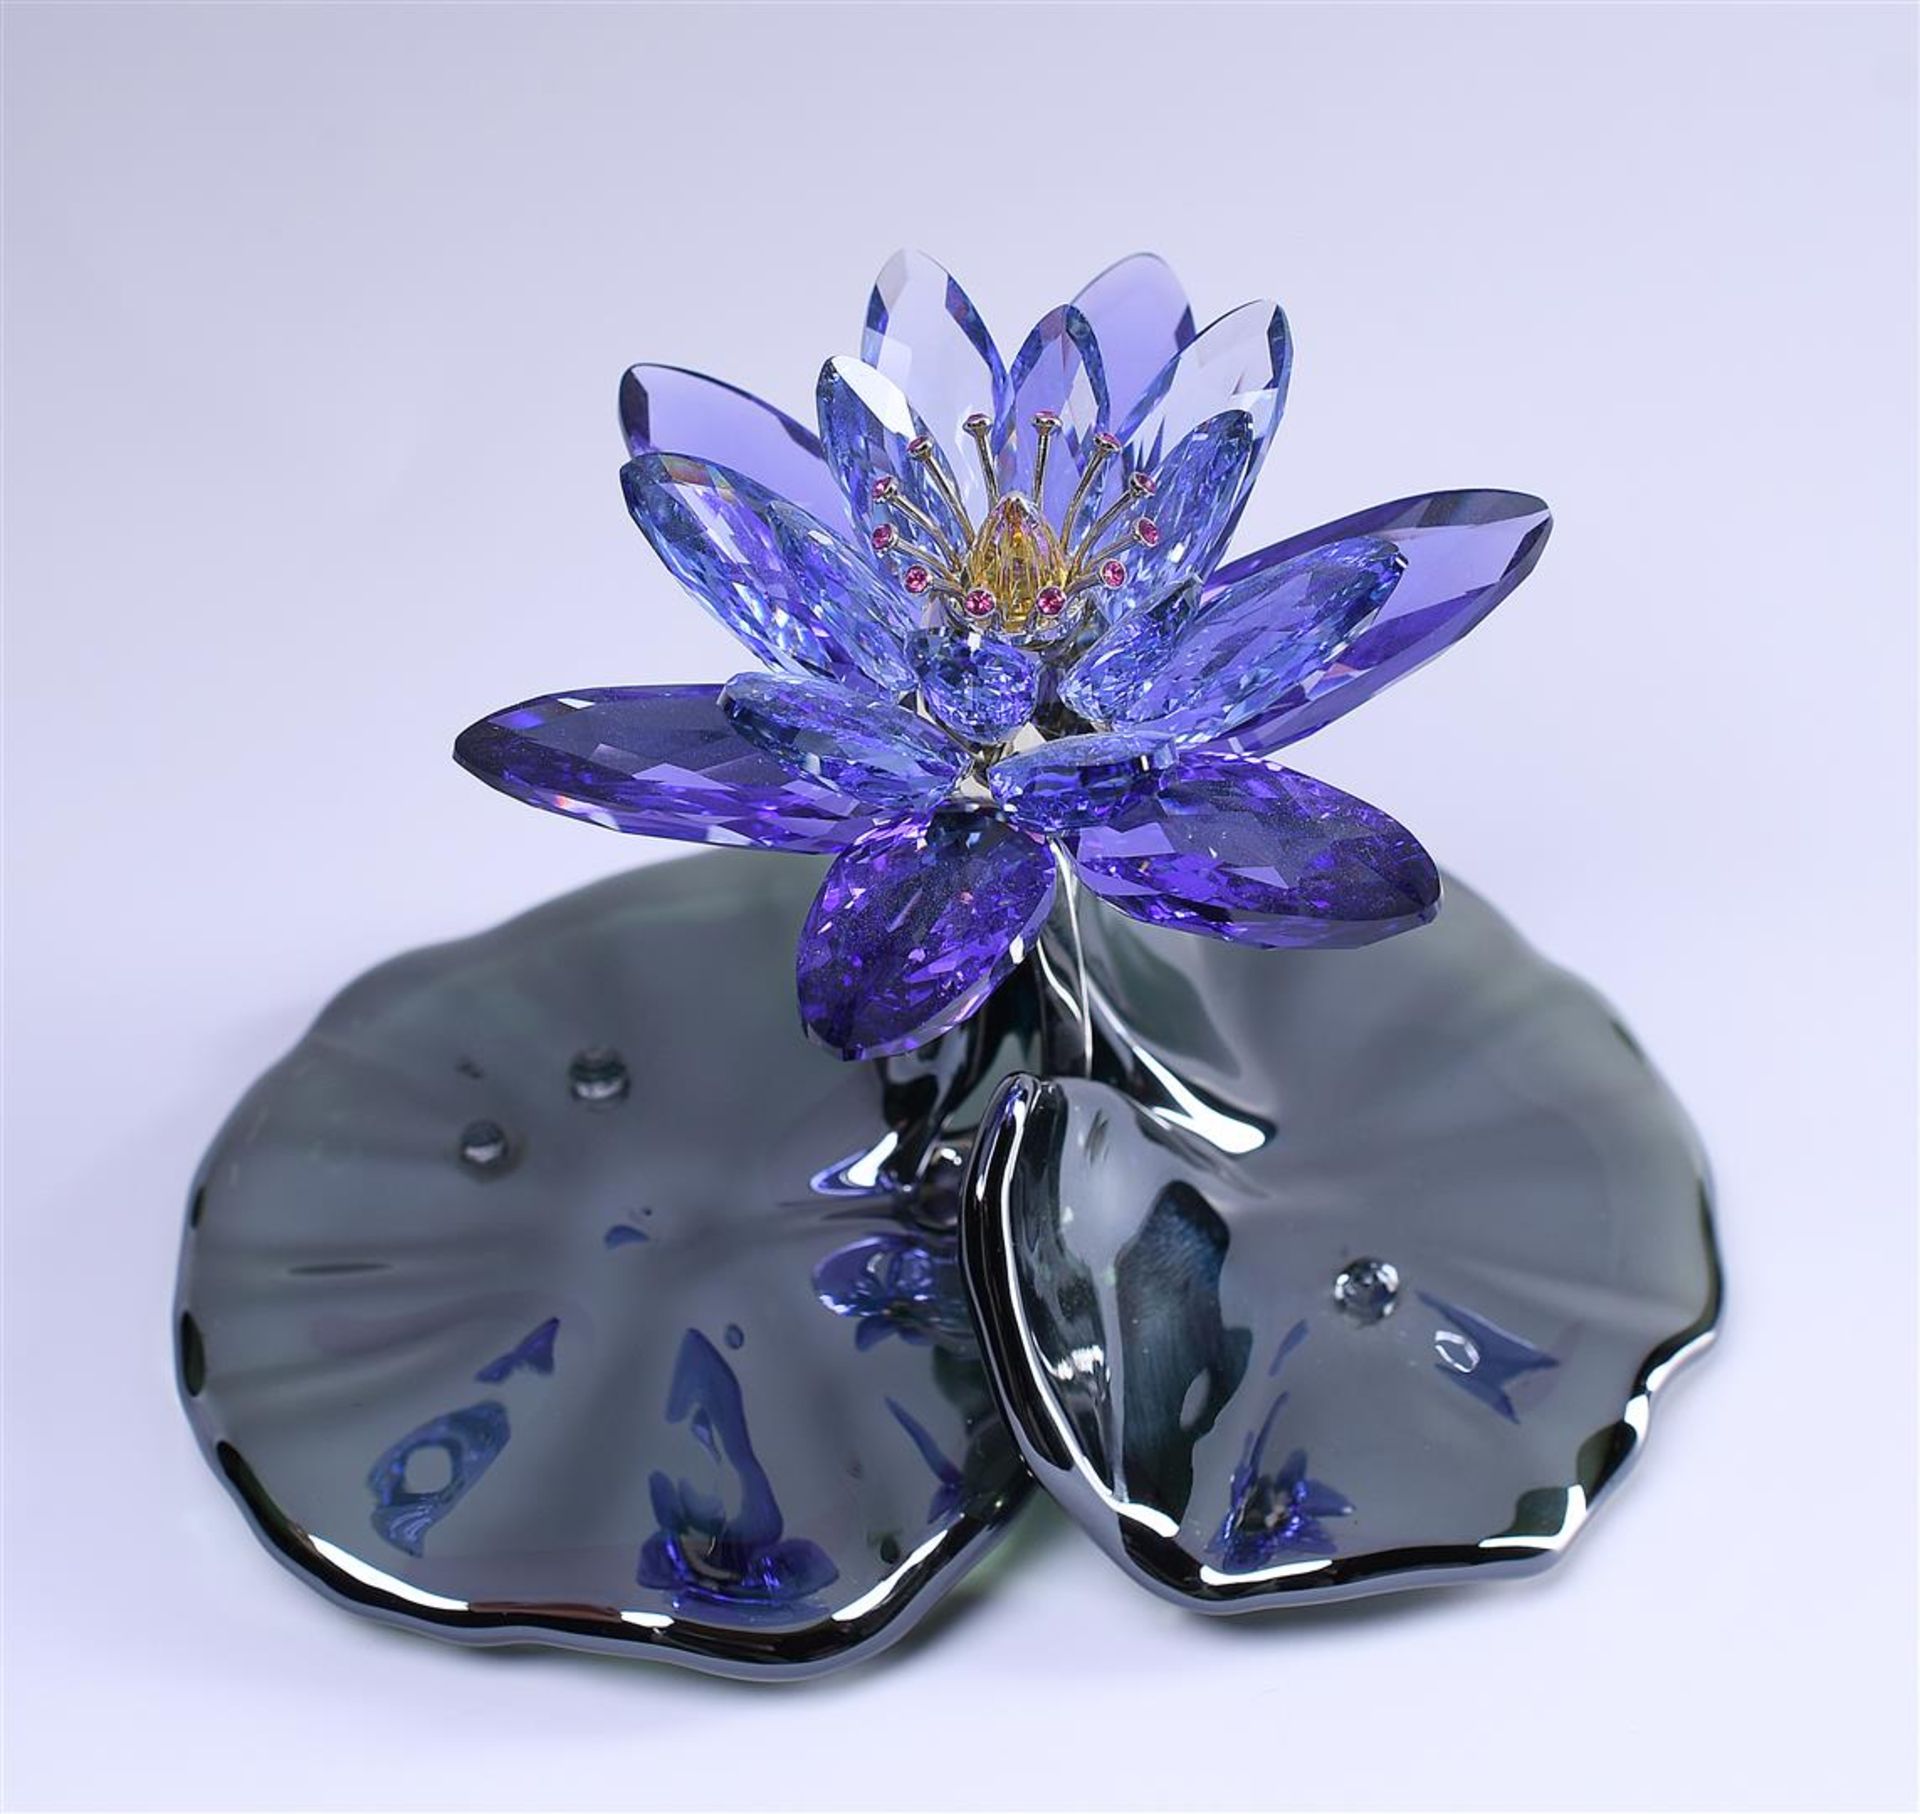 Swarovski, Water Lily - Blue Violet, Year of issue 2012, 1141630. Includes original box.
7.3 x 10.8  - Image 3 of 4